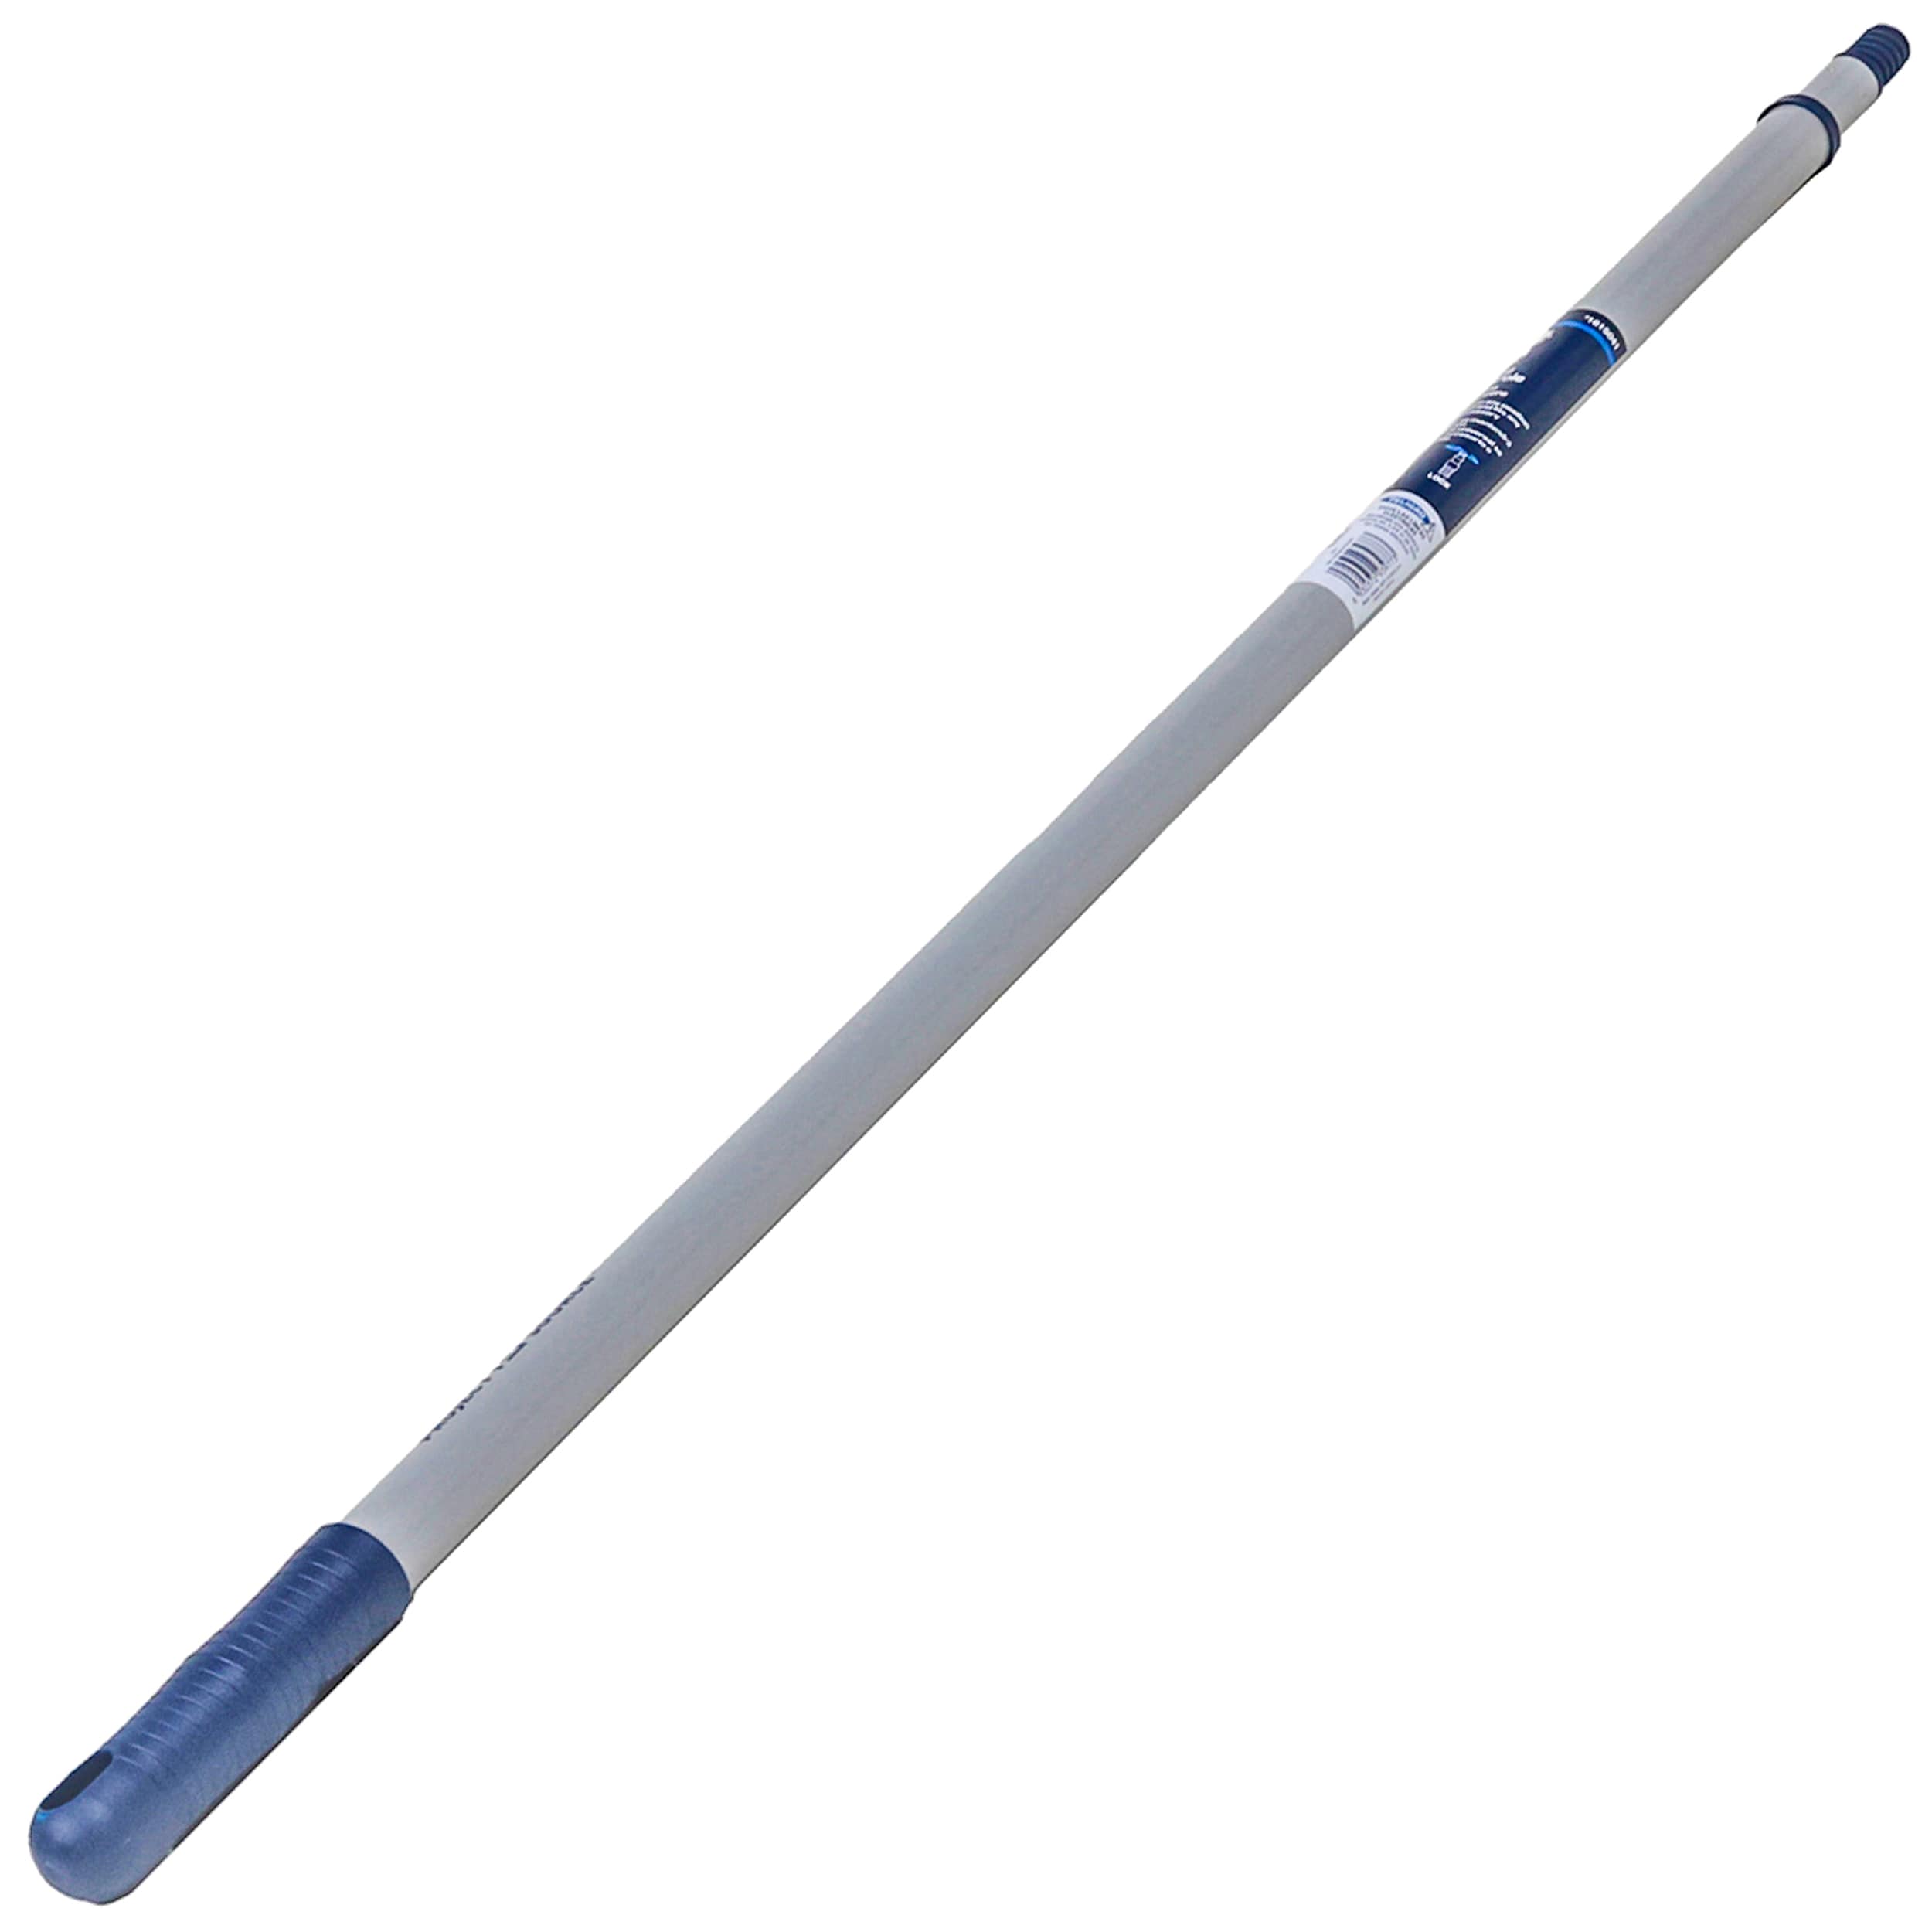 Lowe's 3-ft to 6-ft Telescoping Threaded Extension Pole